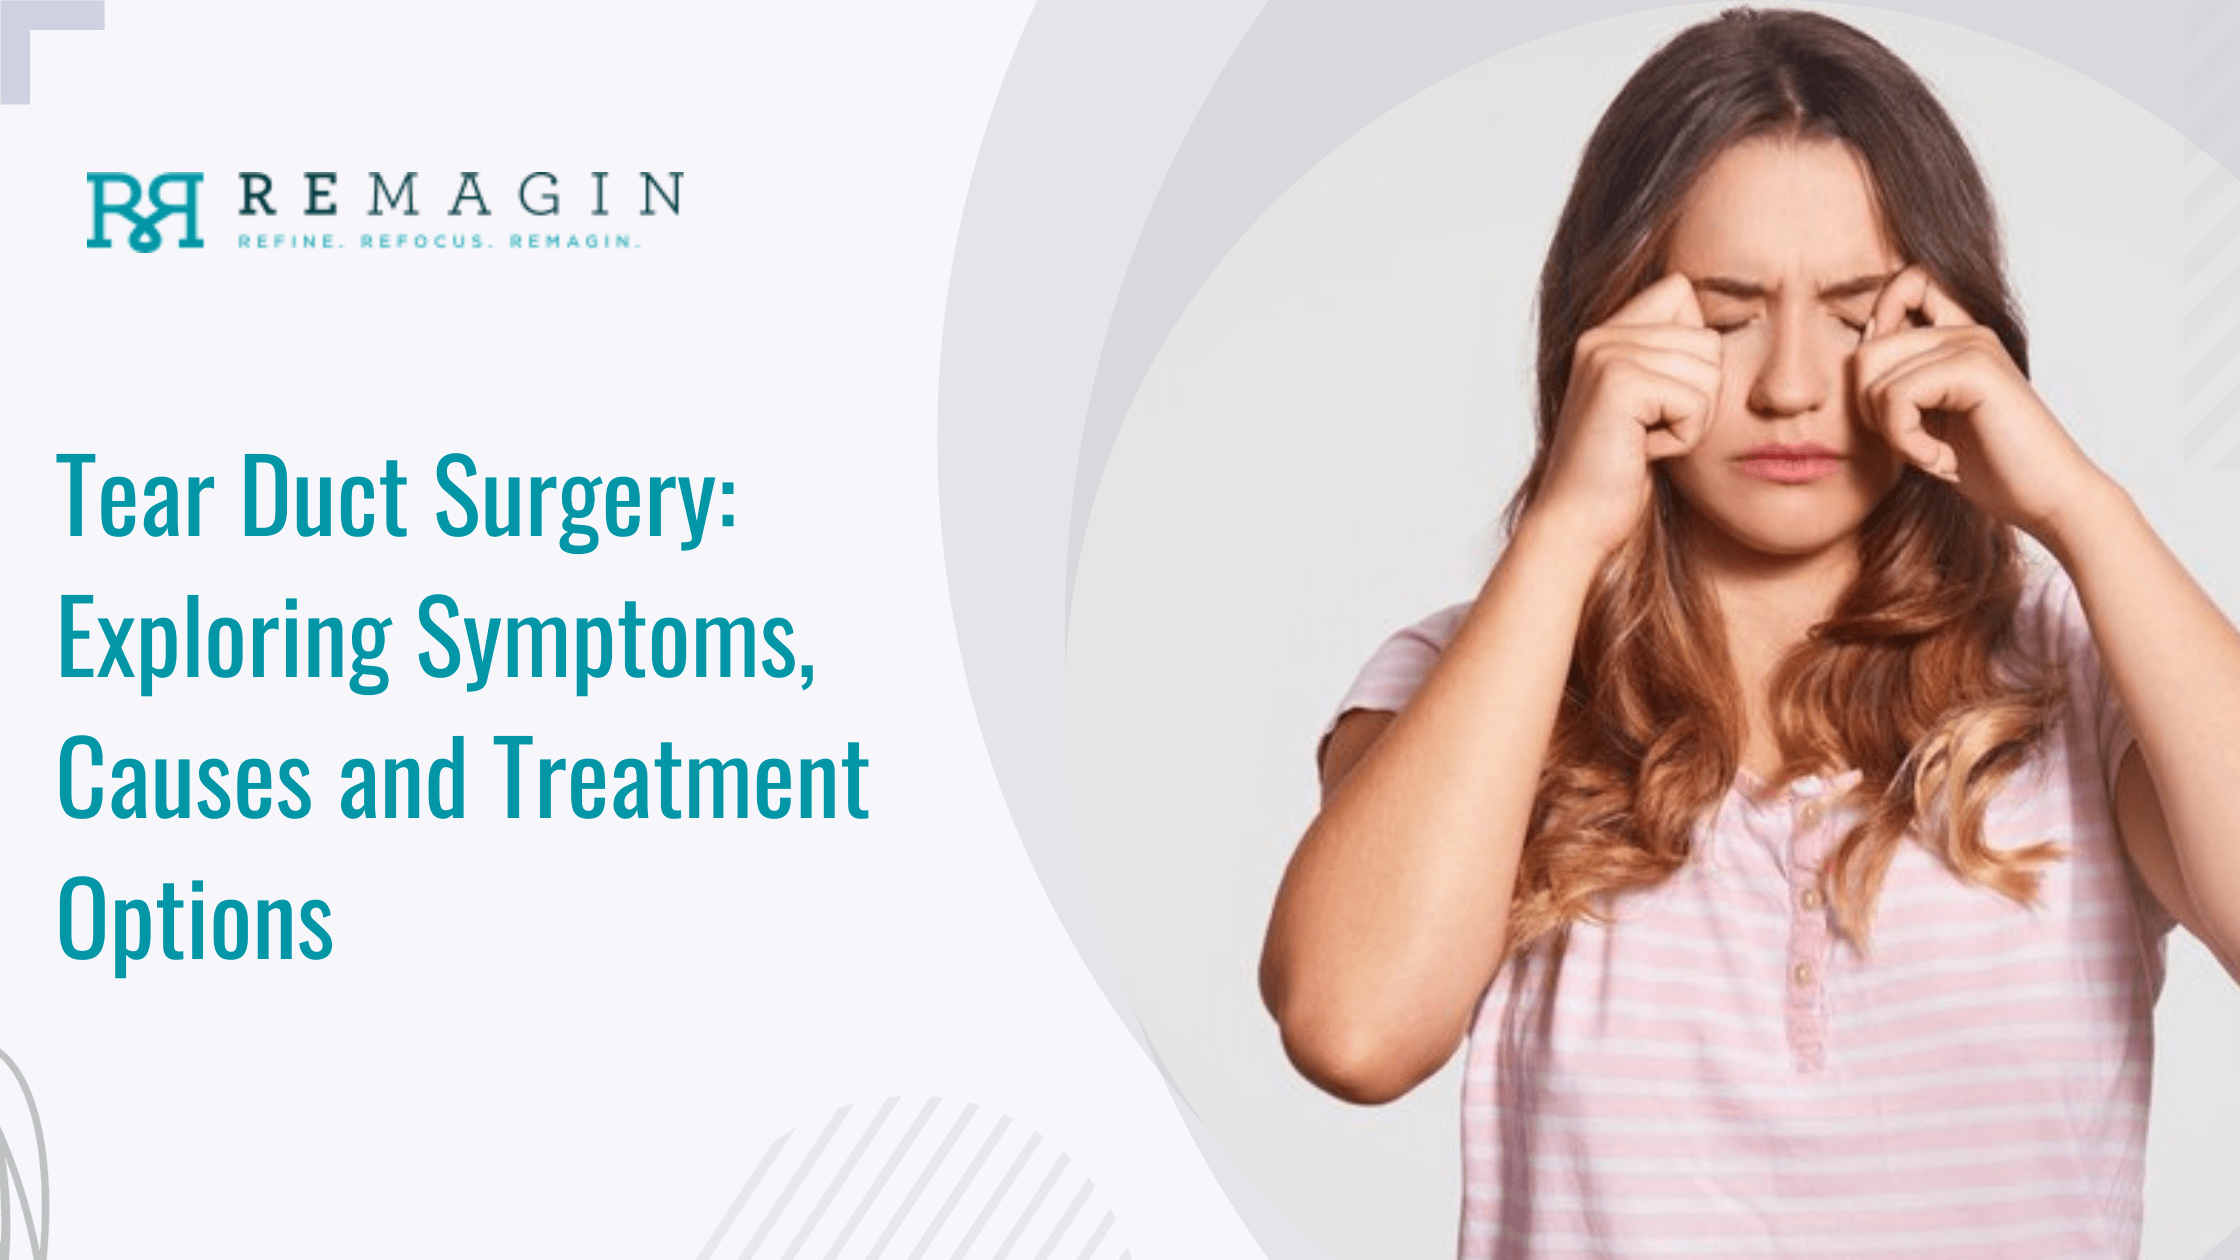 Tear Duct Surgery: Exploring Symptoms, Causes and Treatment Options